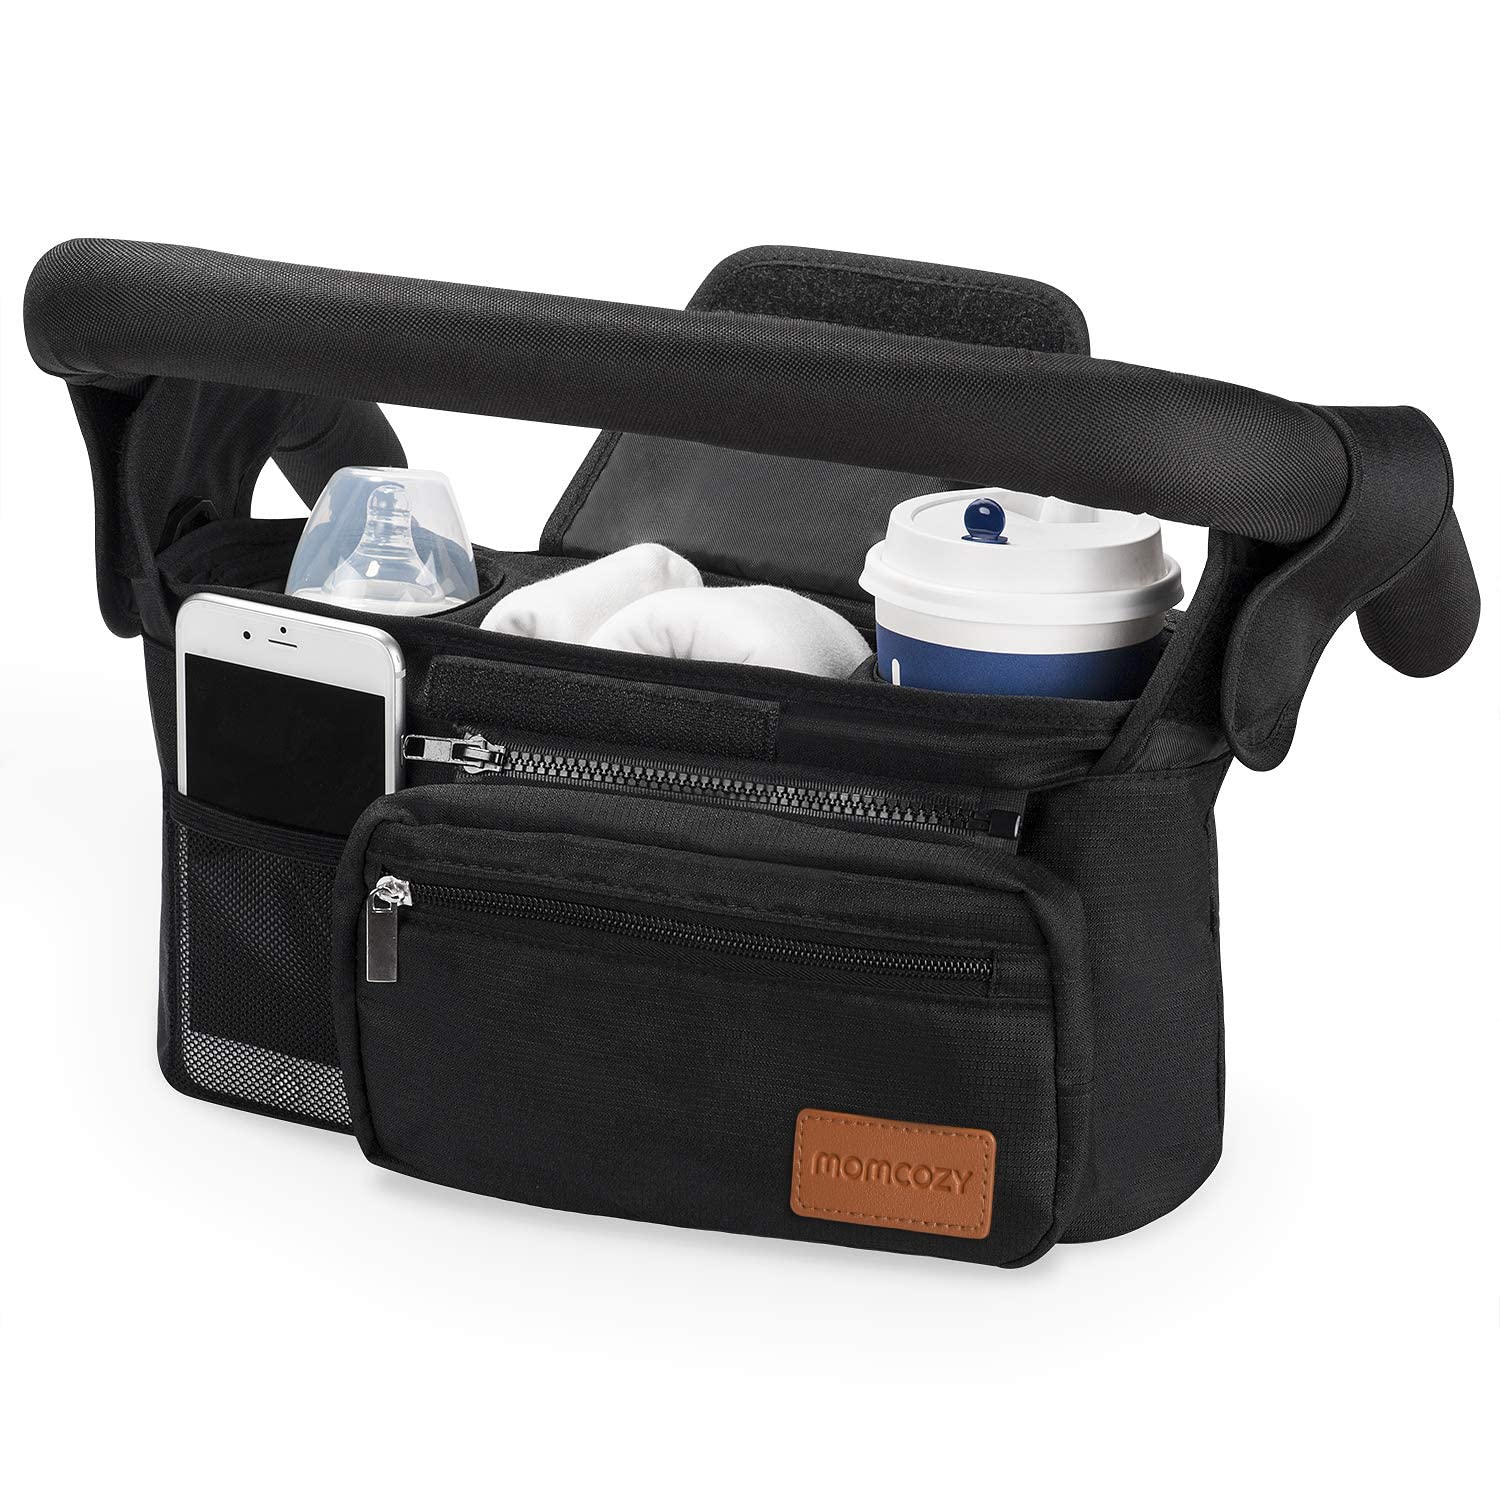 Momcozy Stroller Organizer with Insulated Cup Holder.